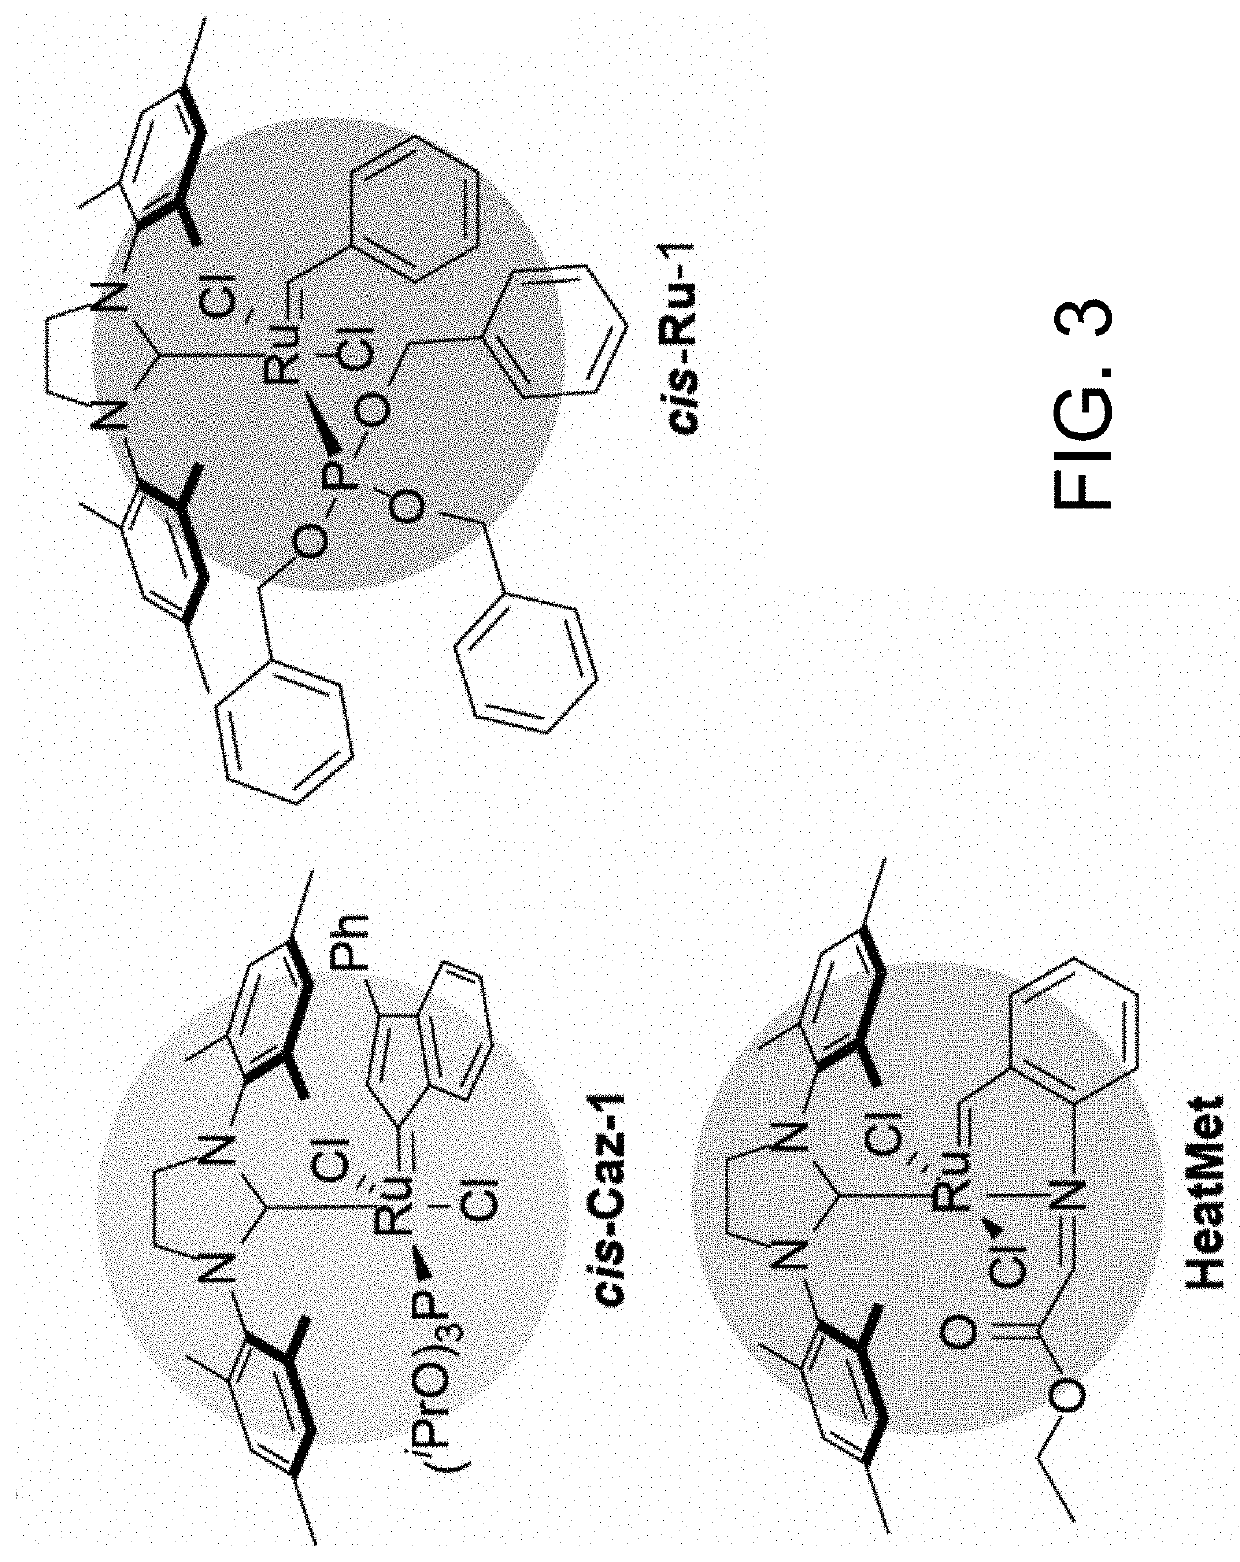 Use of Latent Metathesis Polymerization Systems for Additive Manufacturing